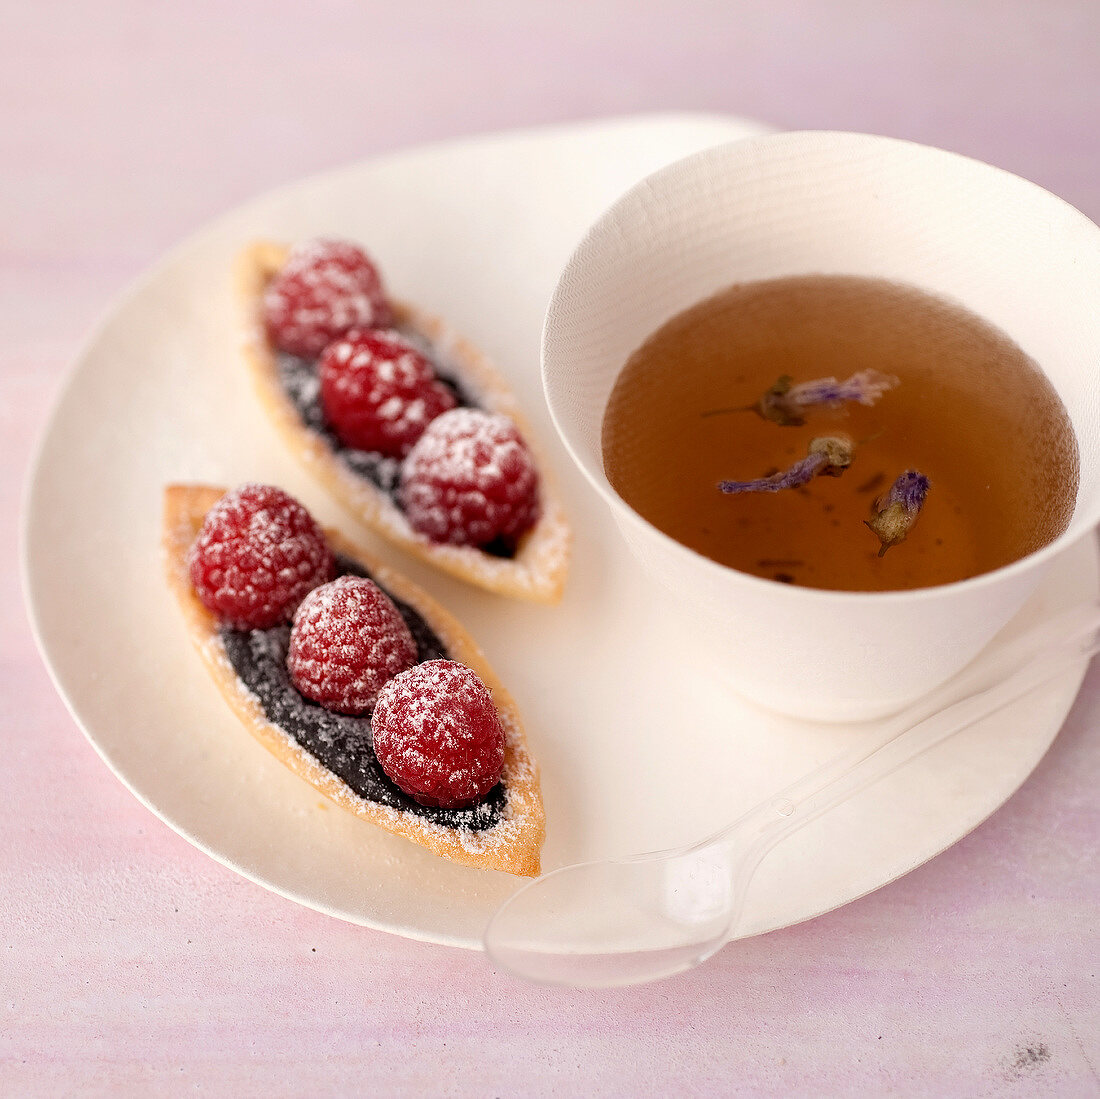 Chocolate-raspberry tartlets and a cup of tea